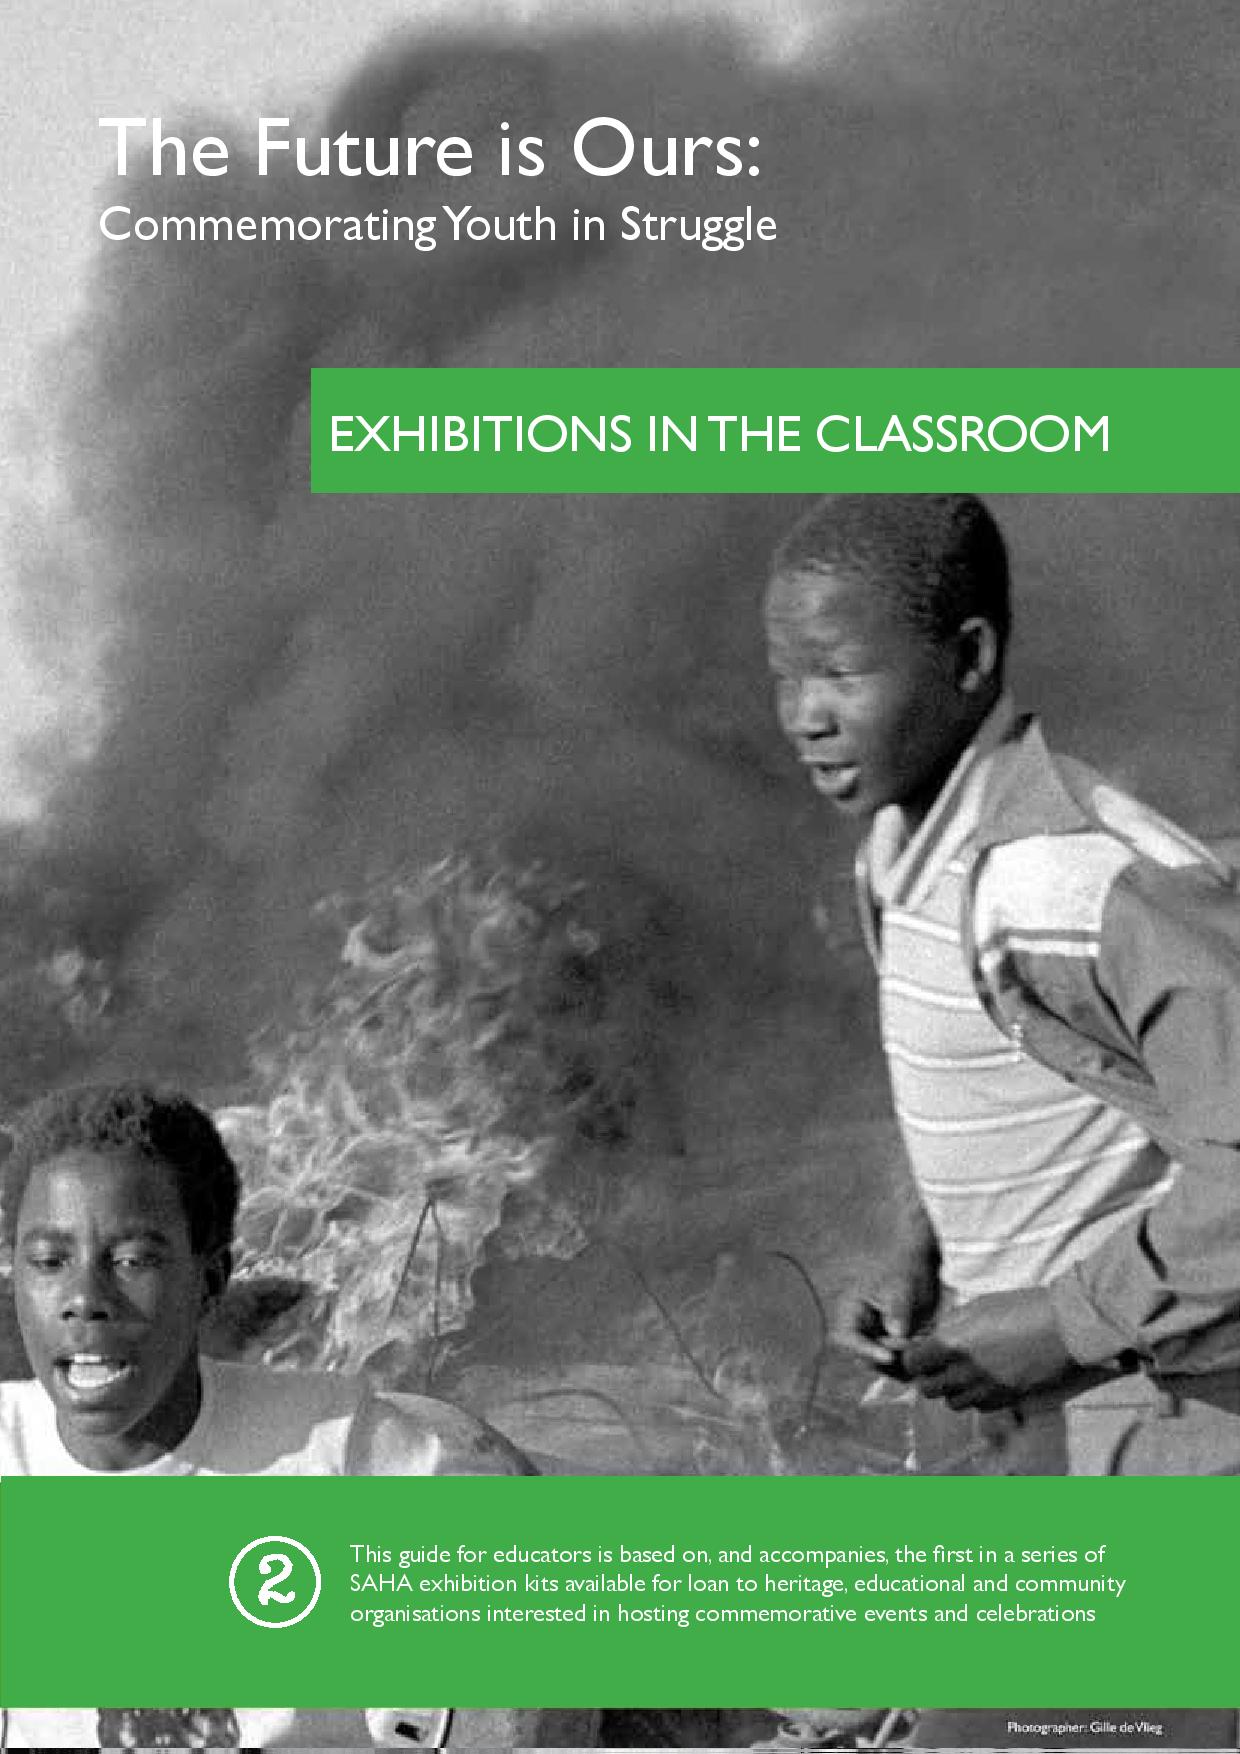 Cover of Exhibitions in the Classroom booklet for Youth Day